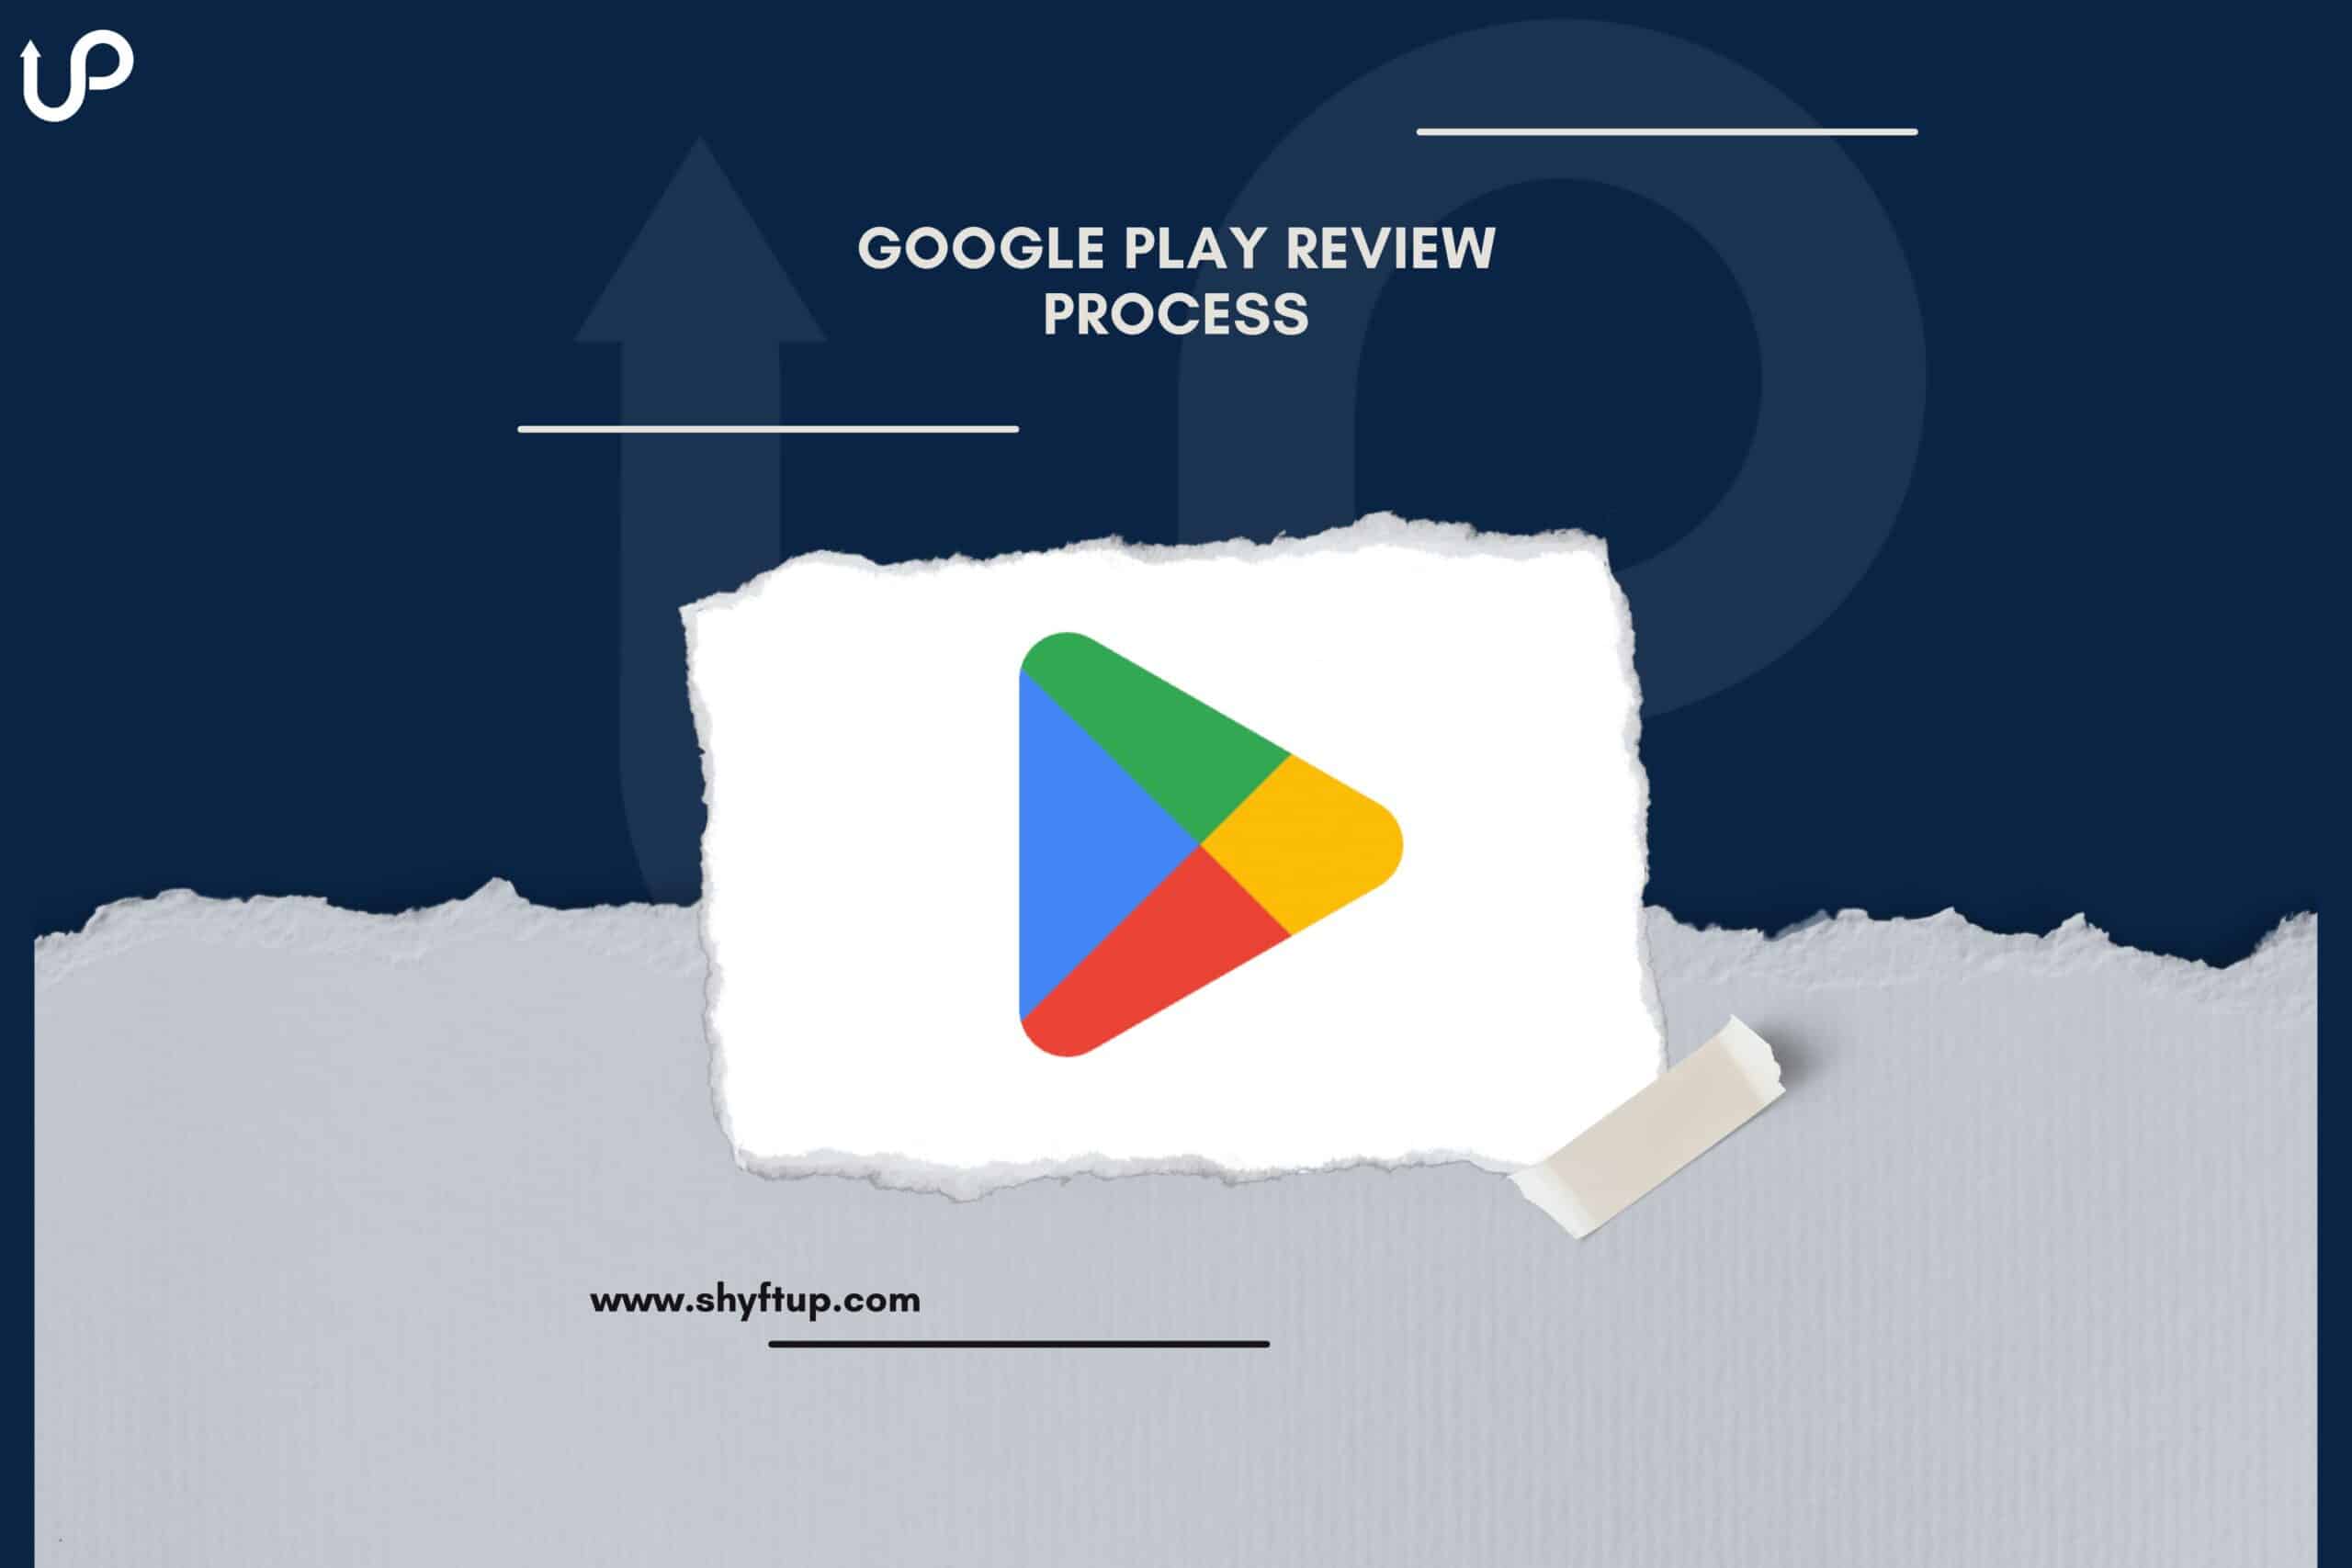 Download and install the Google Play Store app step by step